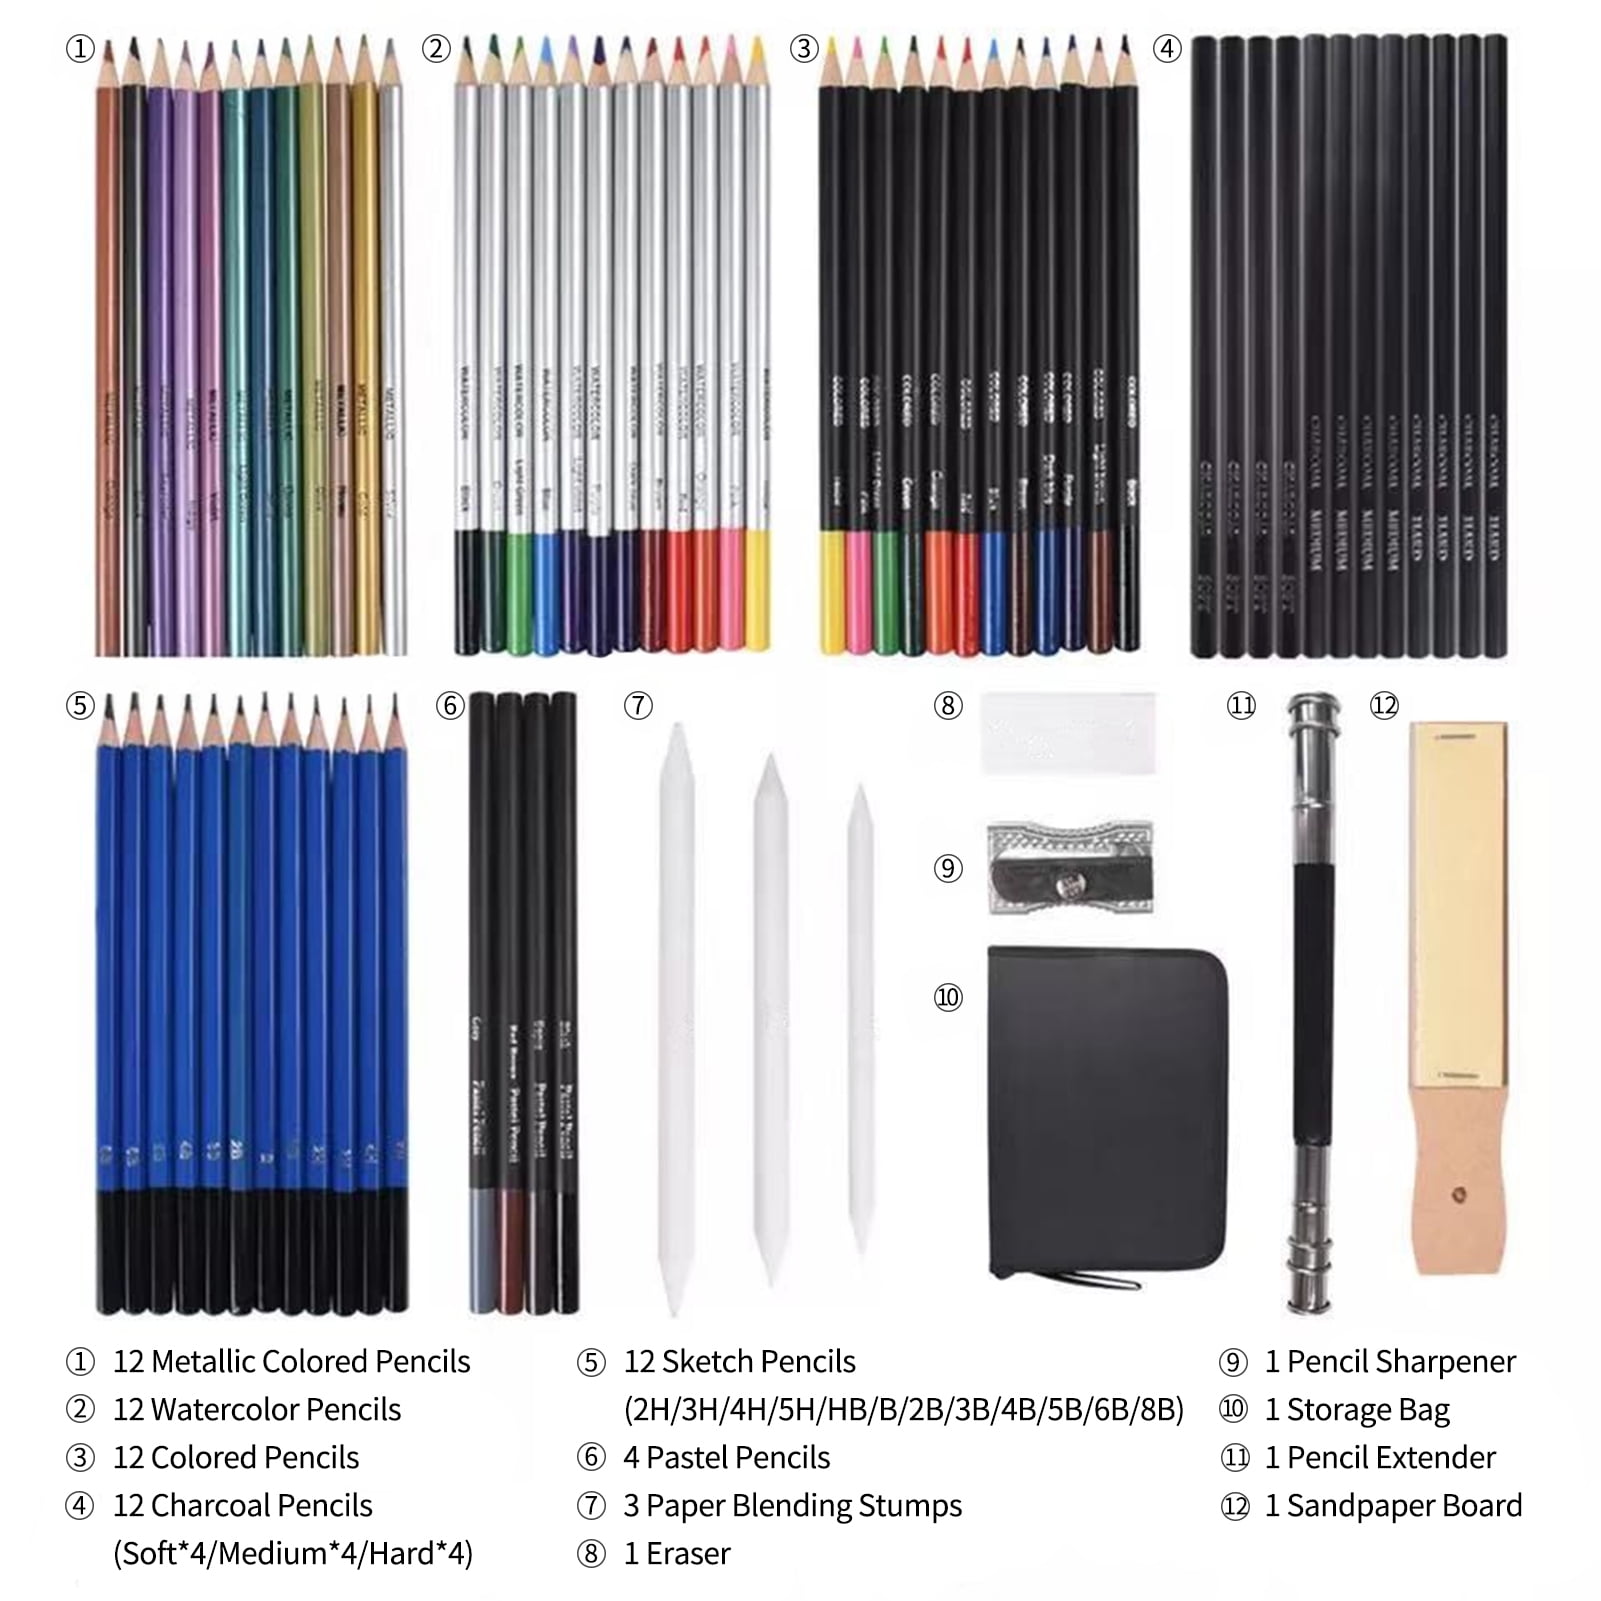 Mixfeer 73-Piece Professional Drawing Pencils and Sketch Set Includes Colored Pencil Sketch Charcoal Pastel Pencil Sharpener Eraser Sketch Paper